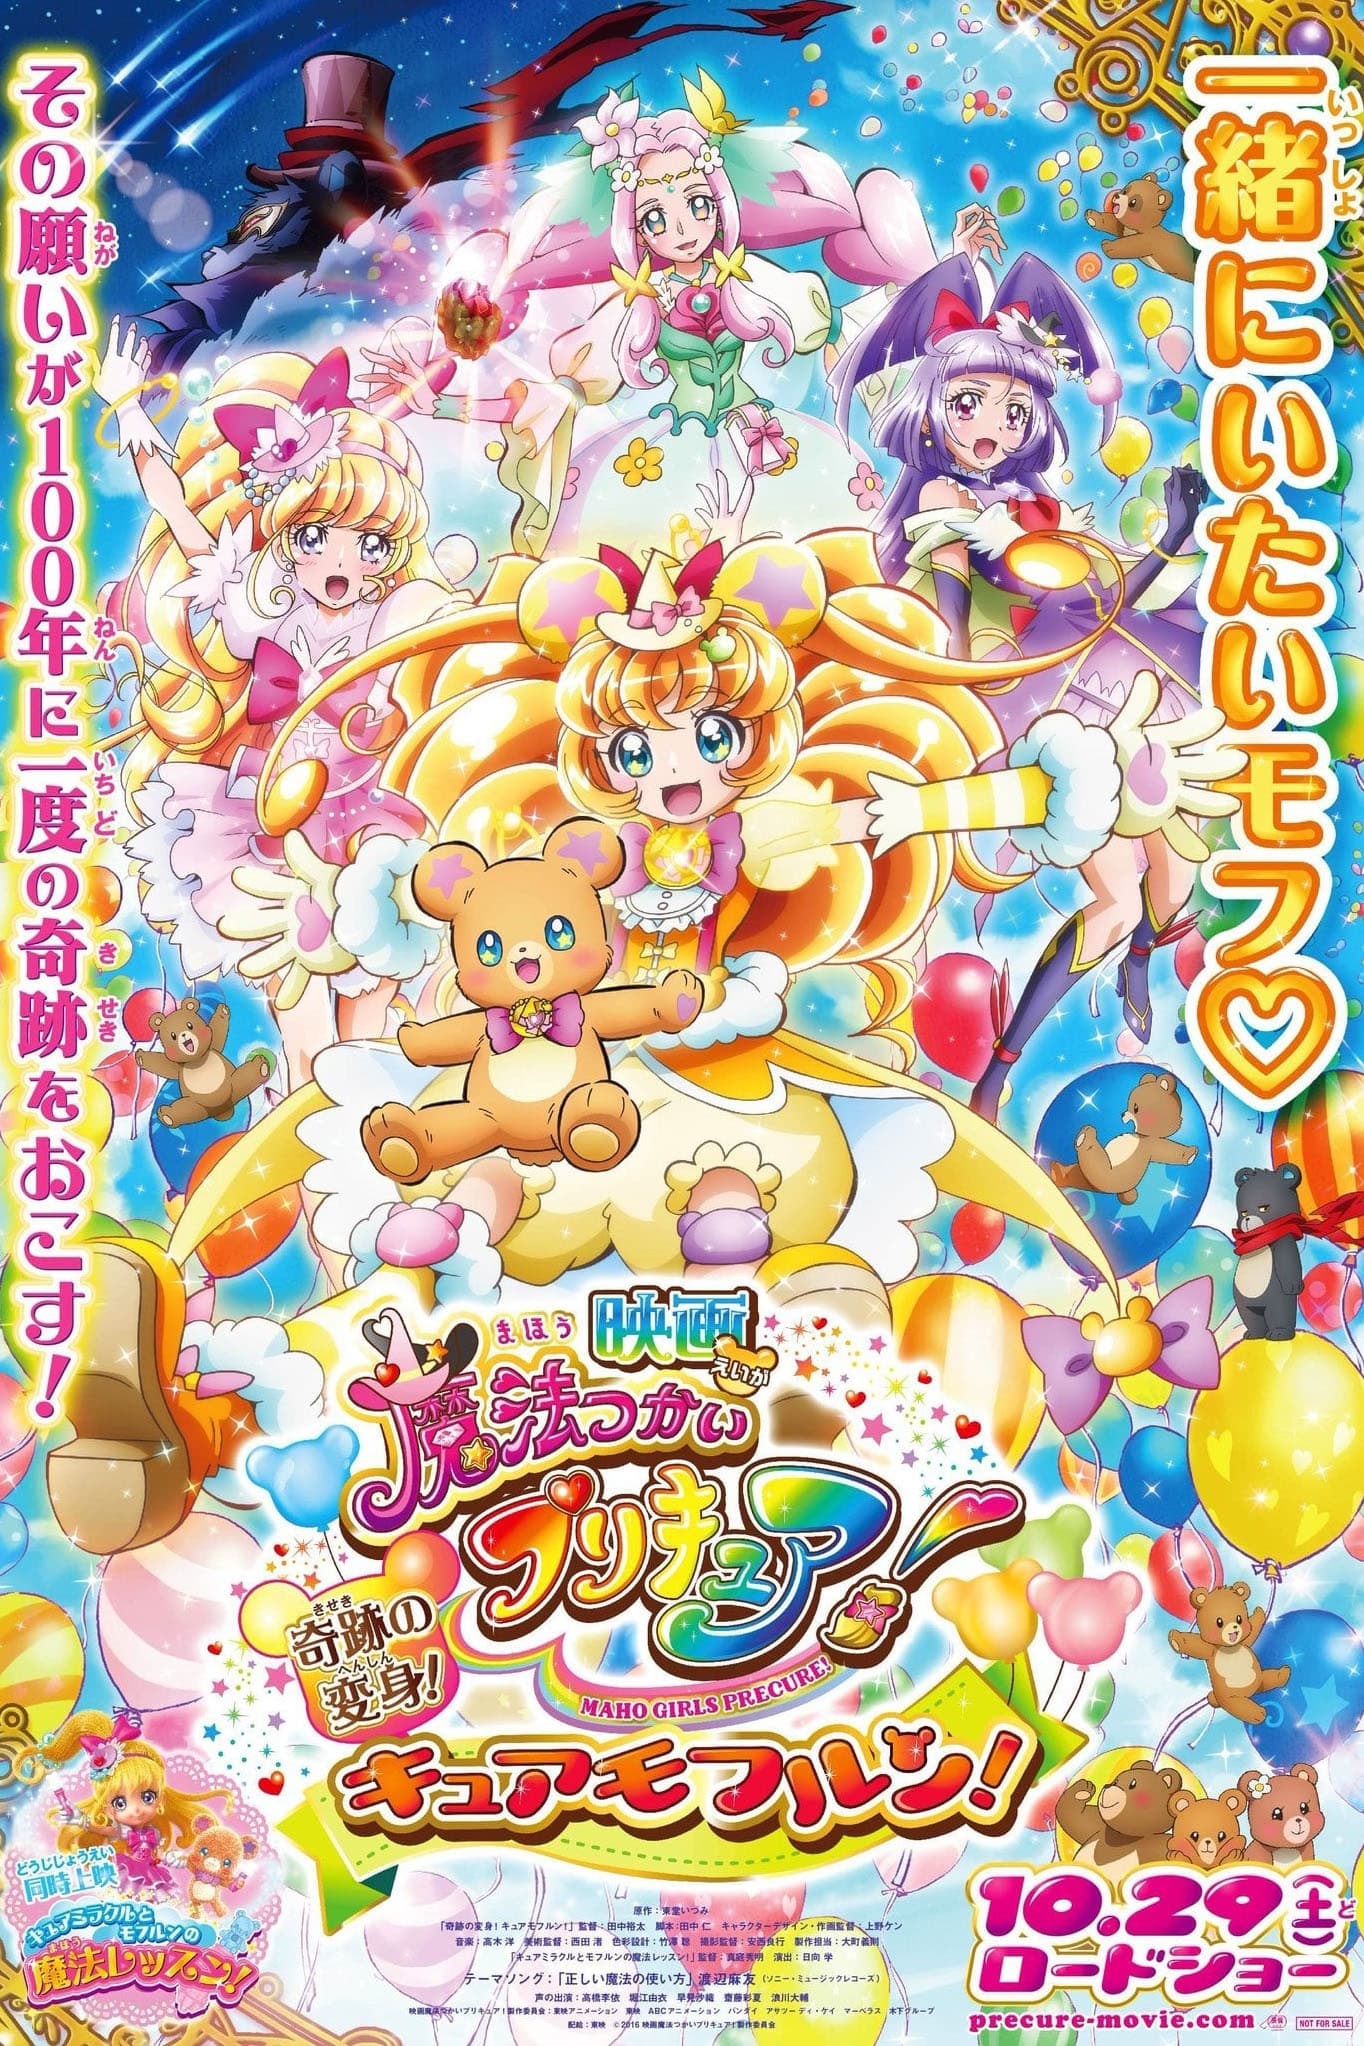 Pretty Cure Movie 13 The Miraculous Transformation! Cure Mofurun!